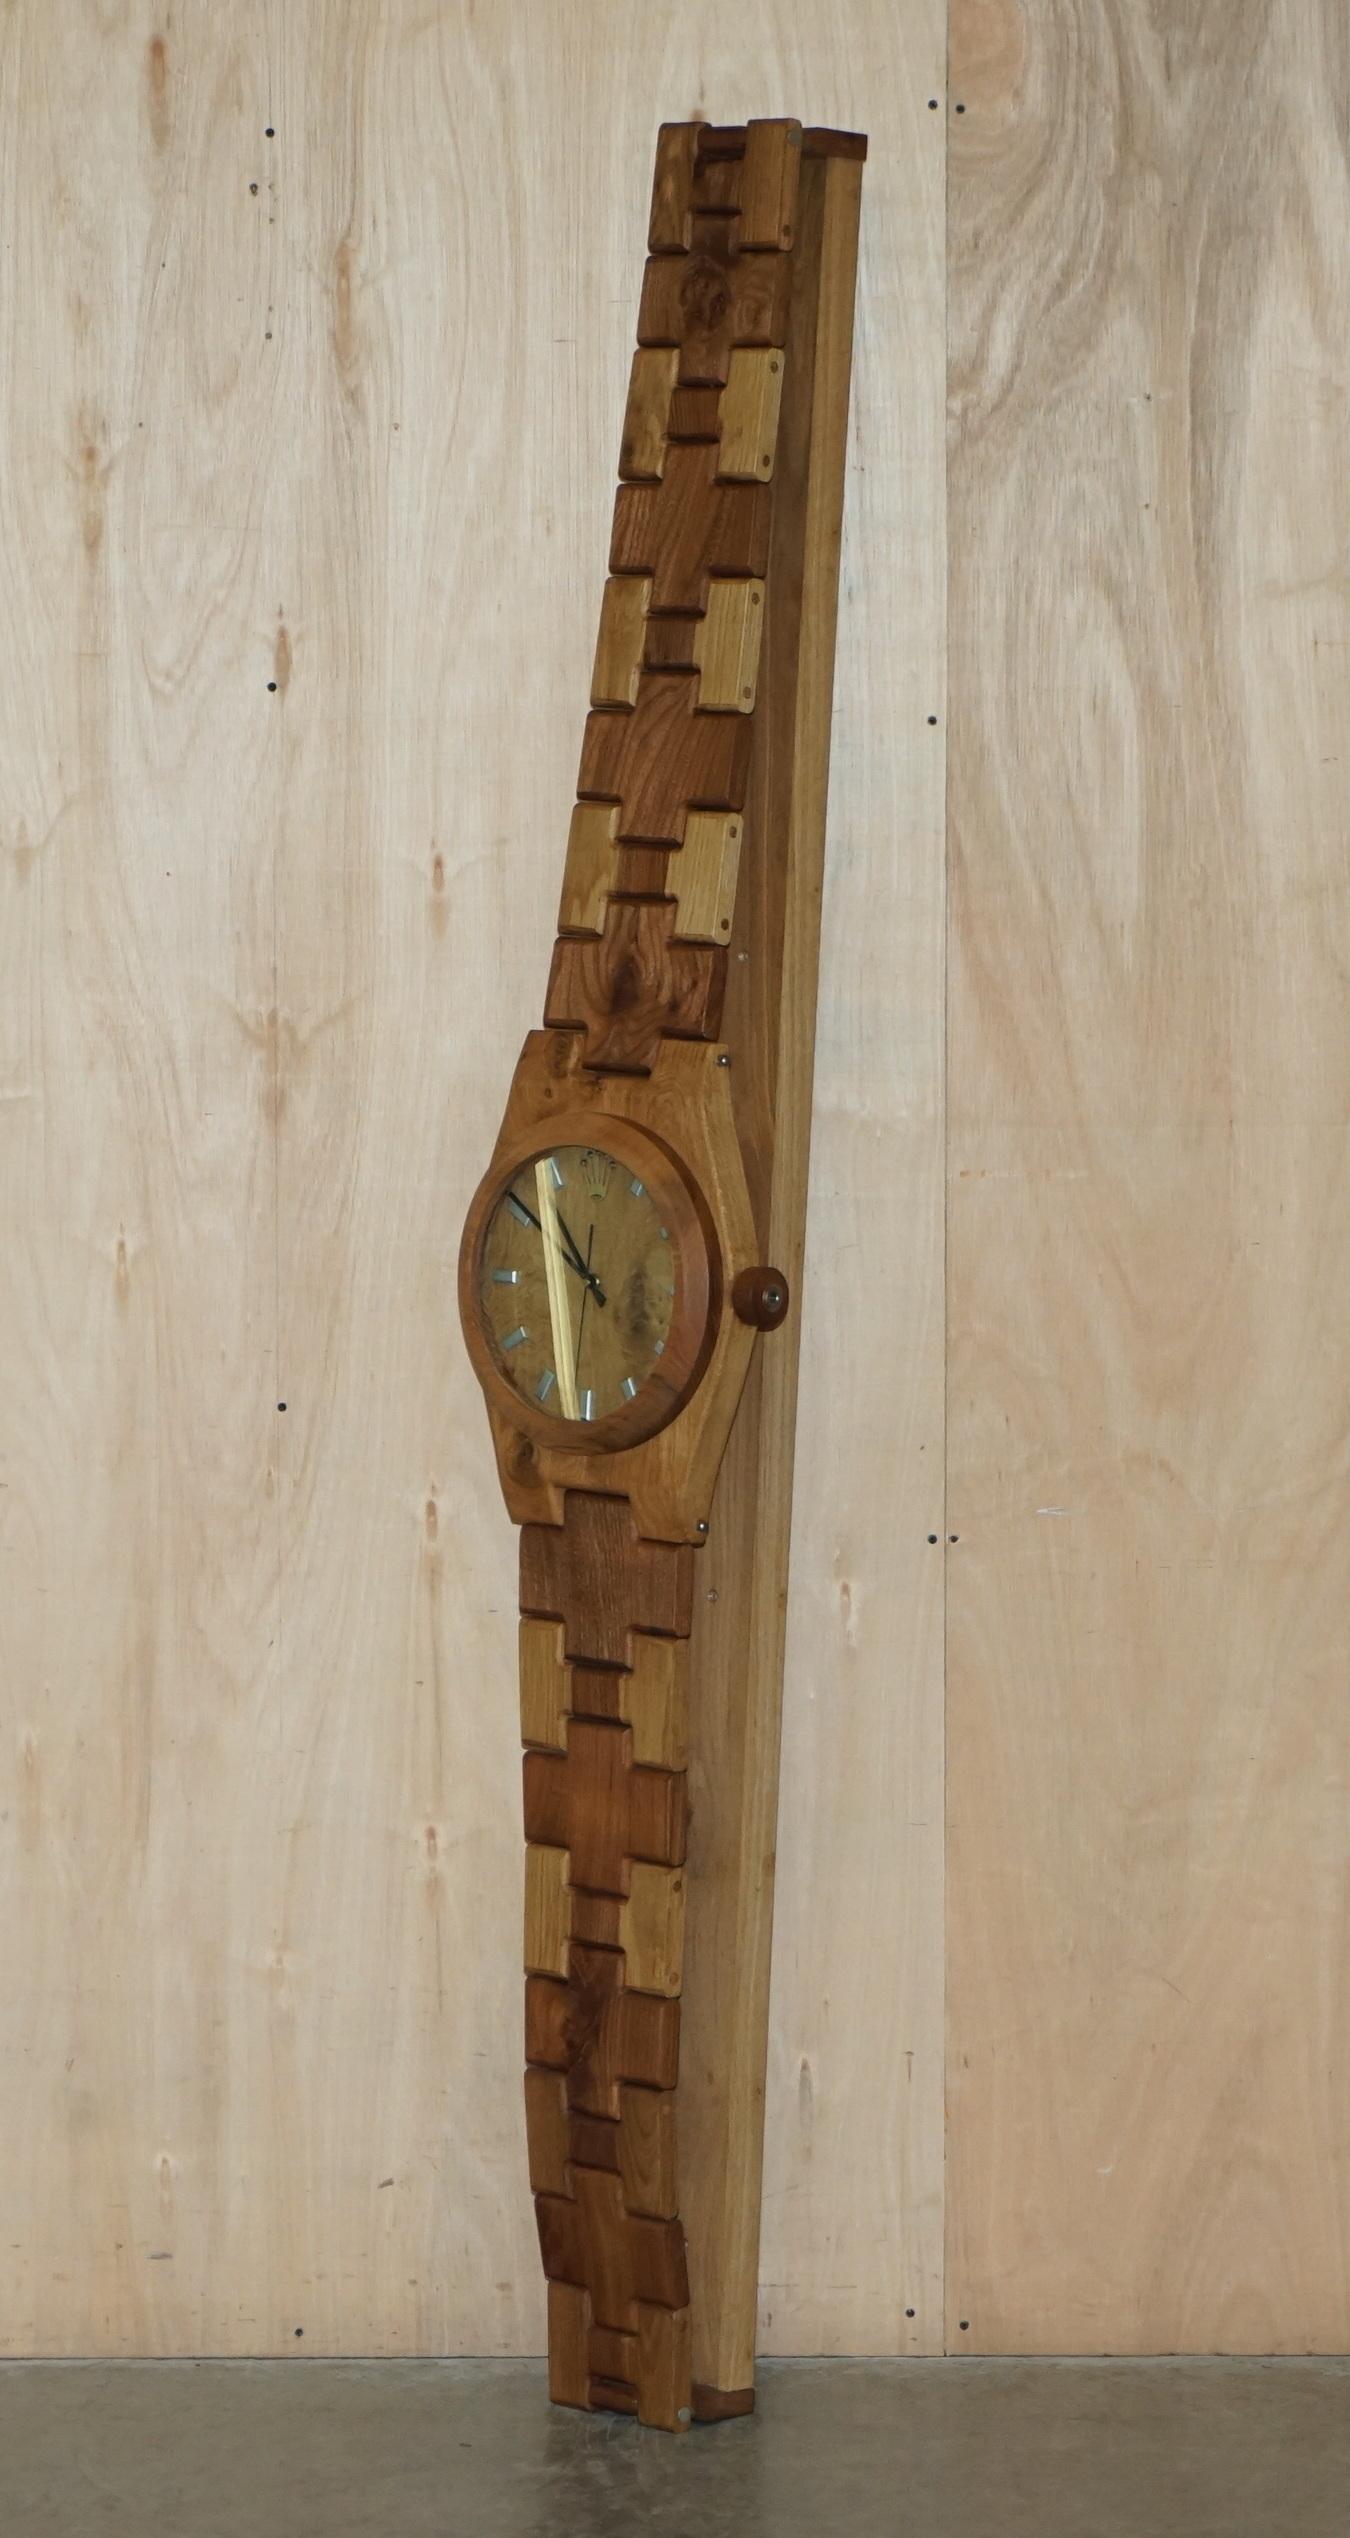 We are delighted to offer for sale this very unique hand carved English oak and elm Rolex Oyster Perpetual wristwatch 2 meter tall wall clock

This is a very rare chance to buy an original Rolex shop fitting display piece, hand carved in Elm and